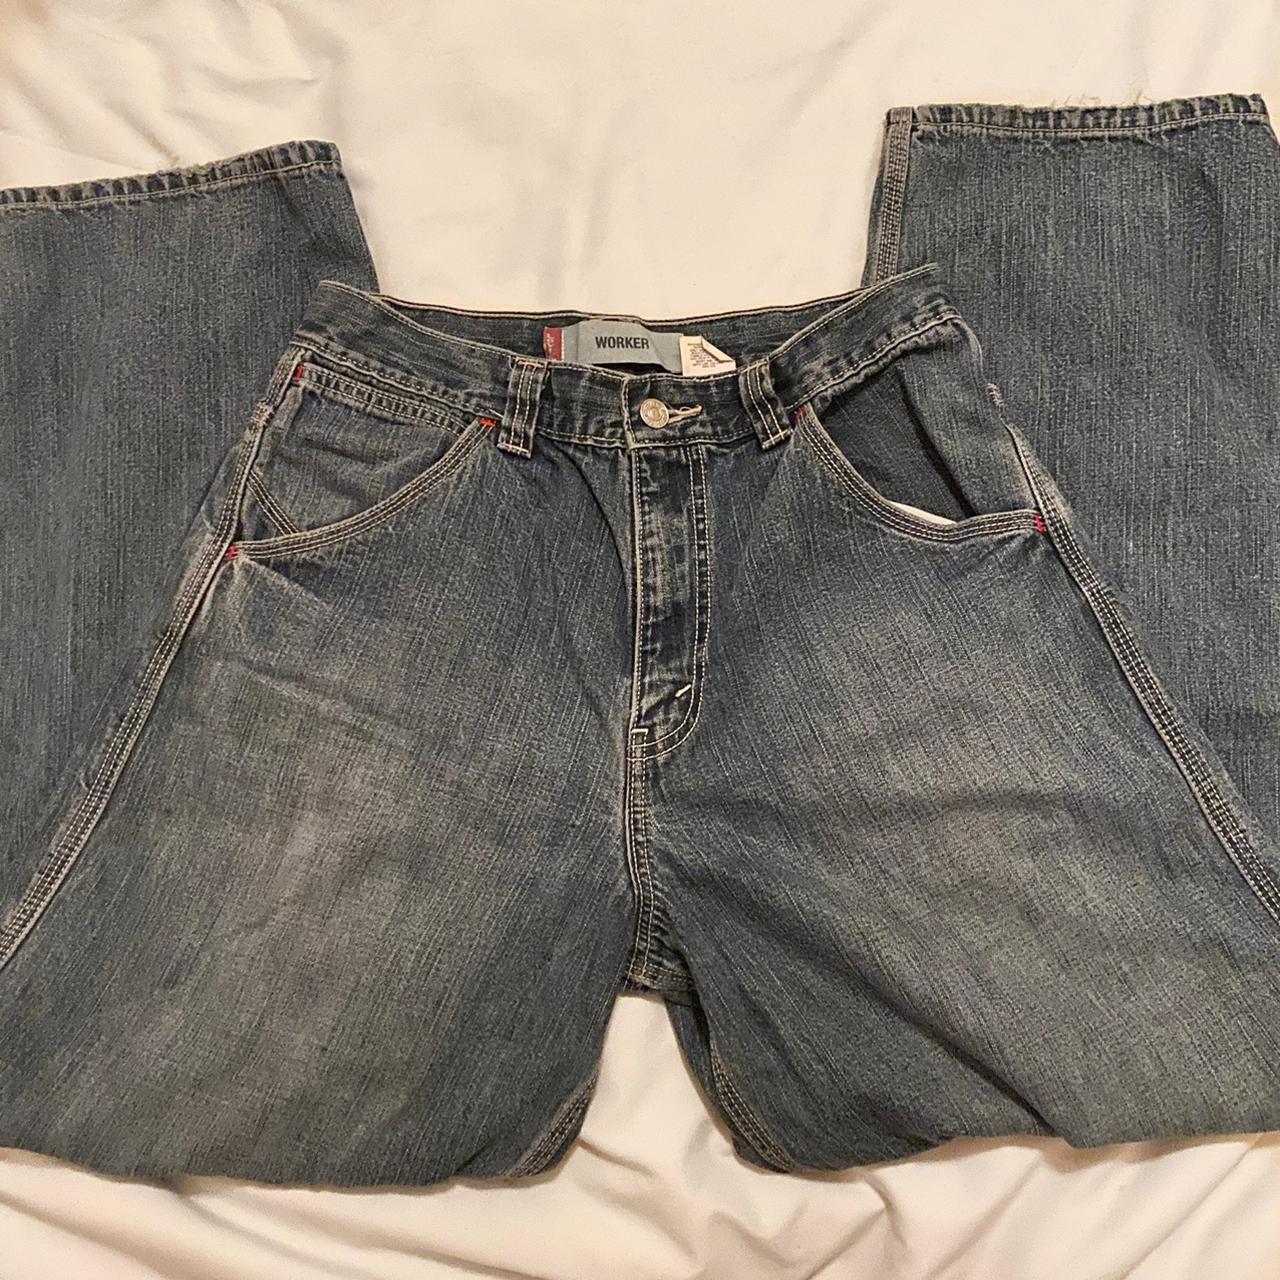 Vintage Levi Carpenter Cargo Jeans These are the... - Depop